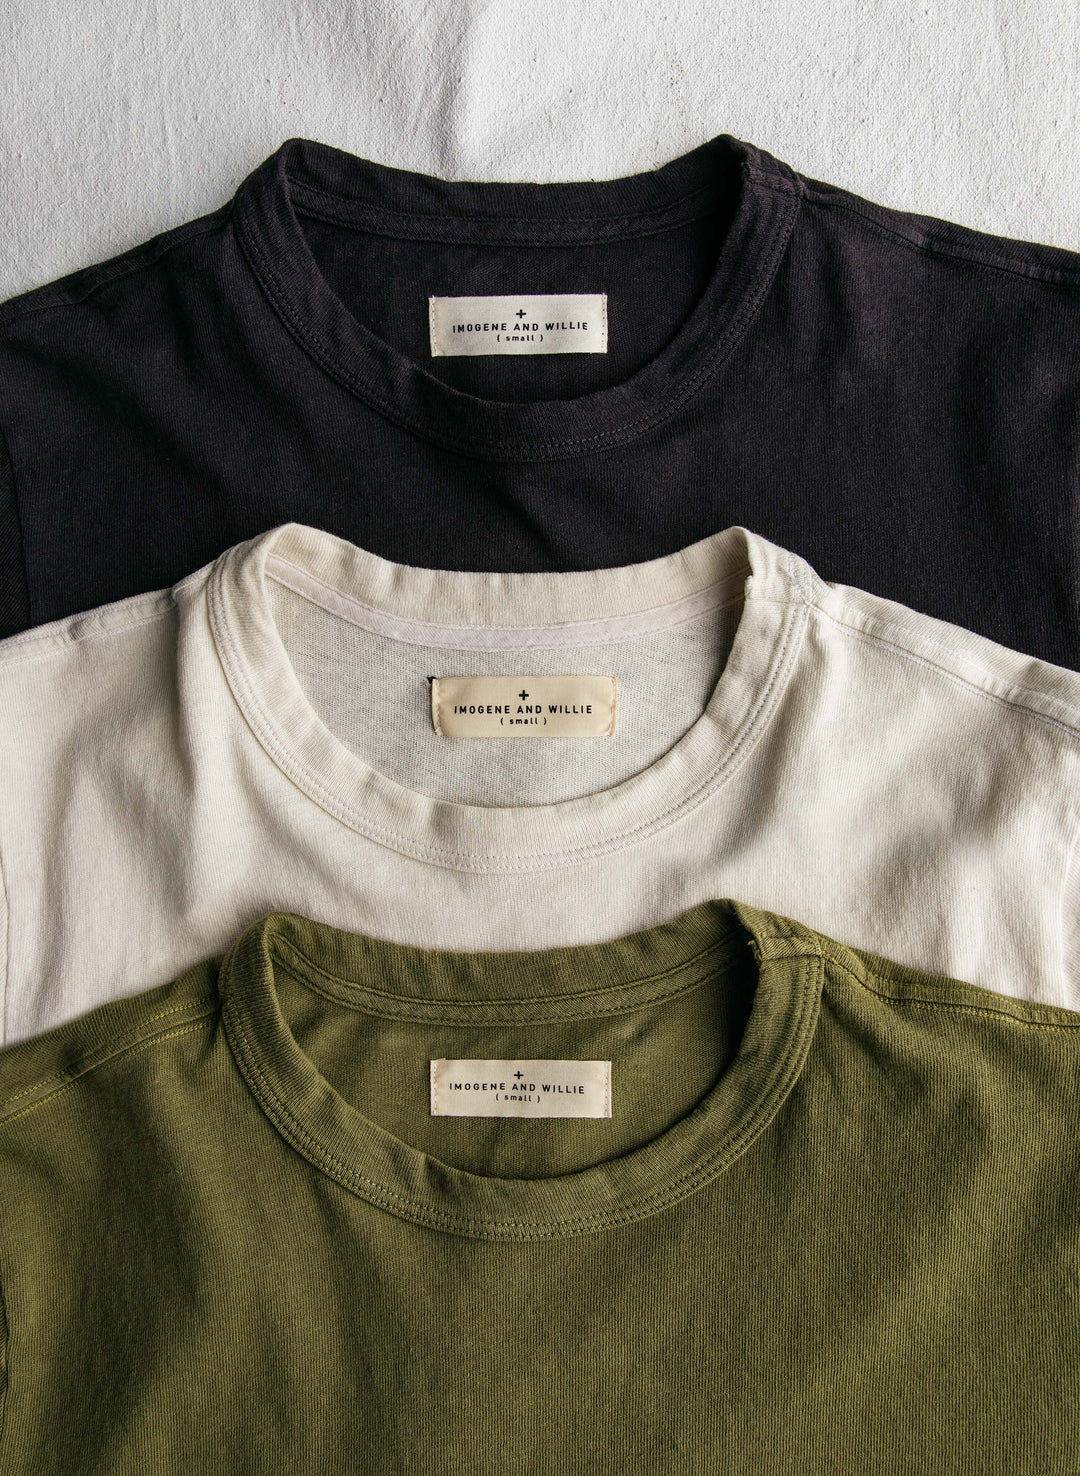 a group of shirts with a label